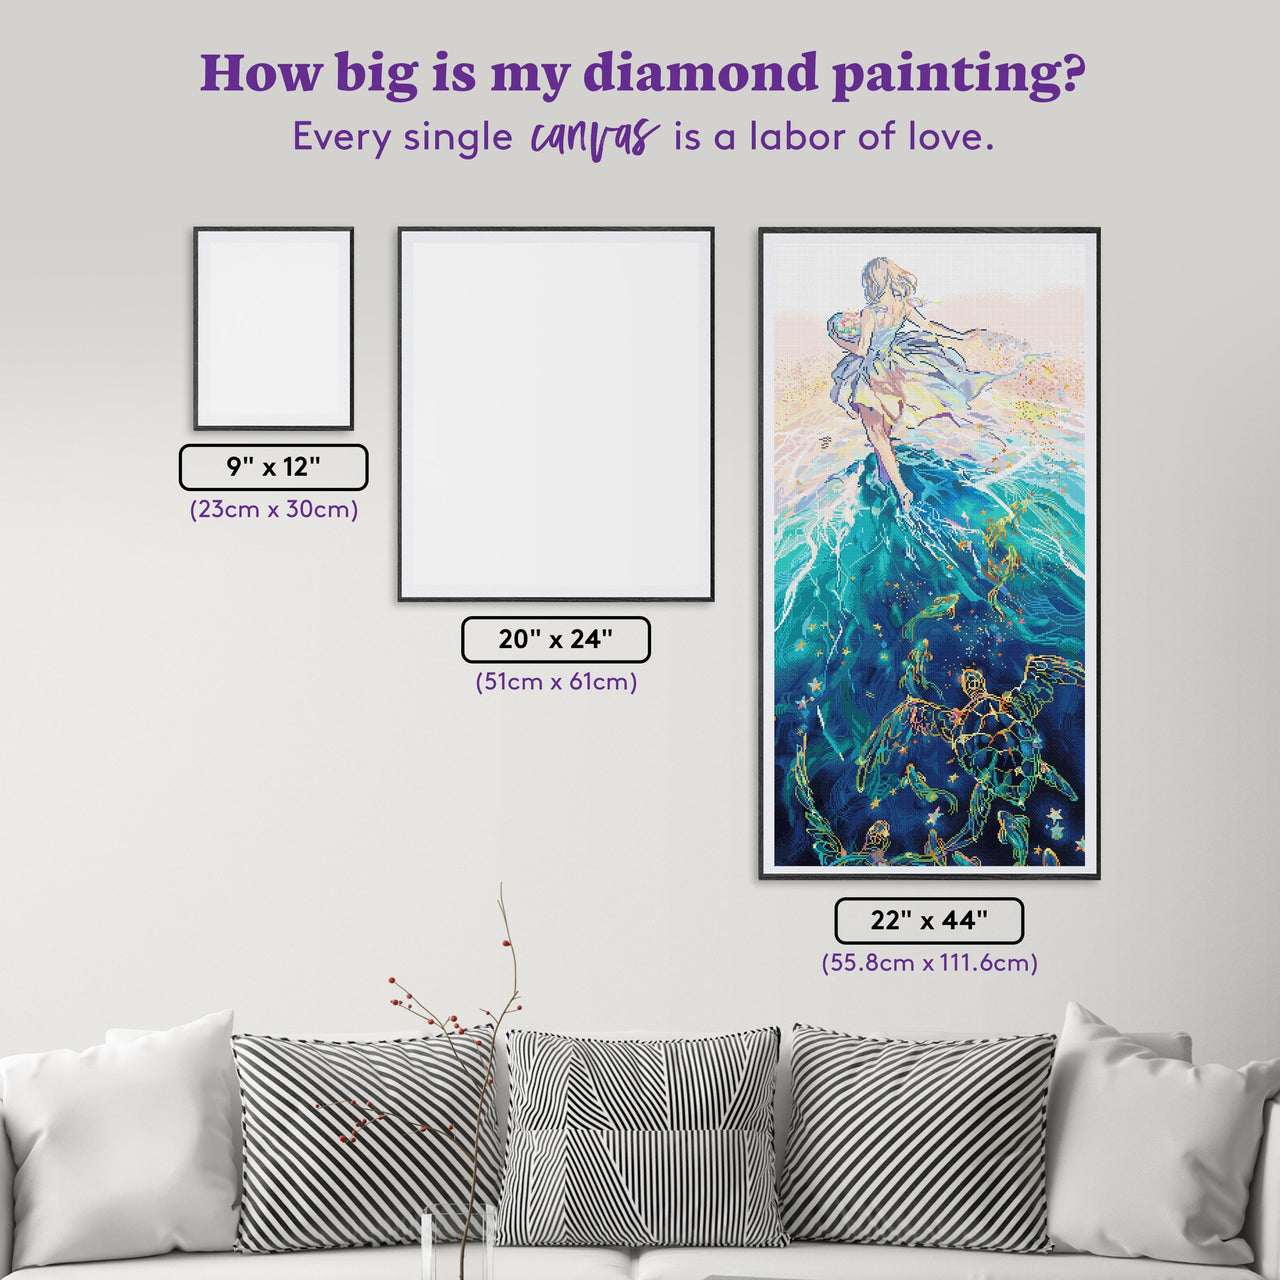 Diamond Painting Seeding Imagination 22" x 44" (55.8cm x 111.6cm) / Square with 54 Colors including 3 ABs, 1 Iridescent Diamonds and 3 Fairy Dust Diamonds / 100,352